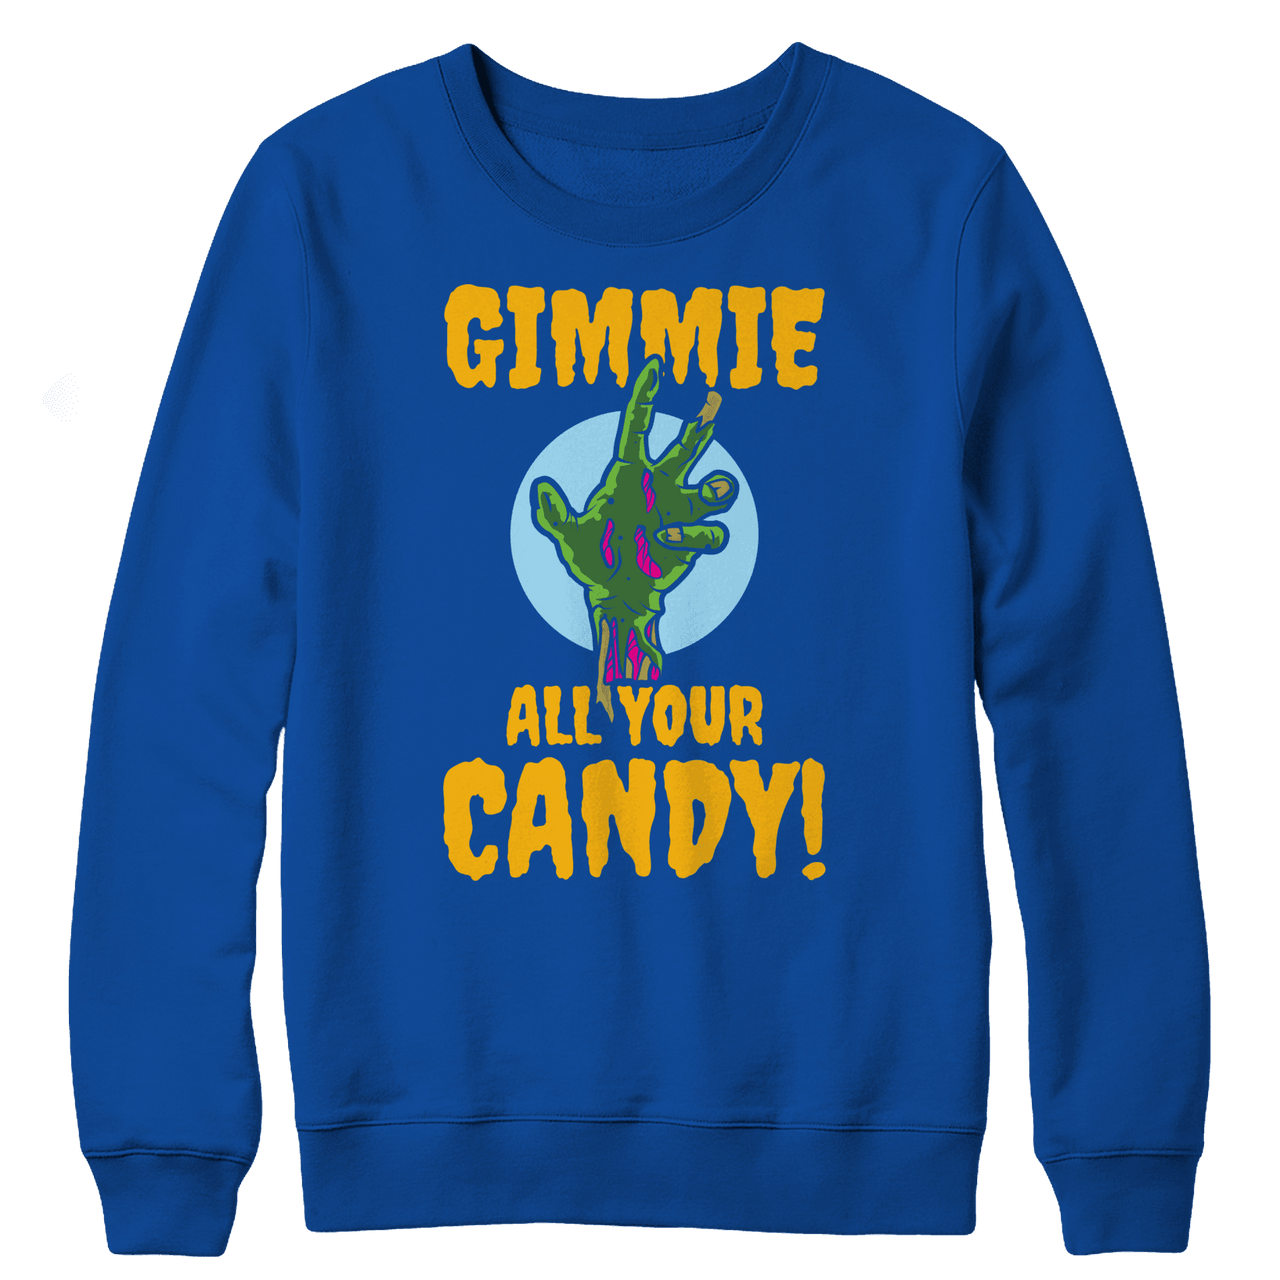 Limited Edition - Gimme All Your Candy!